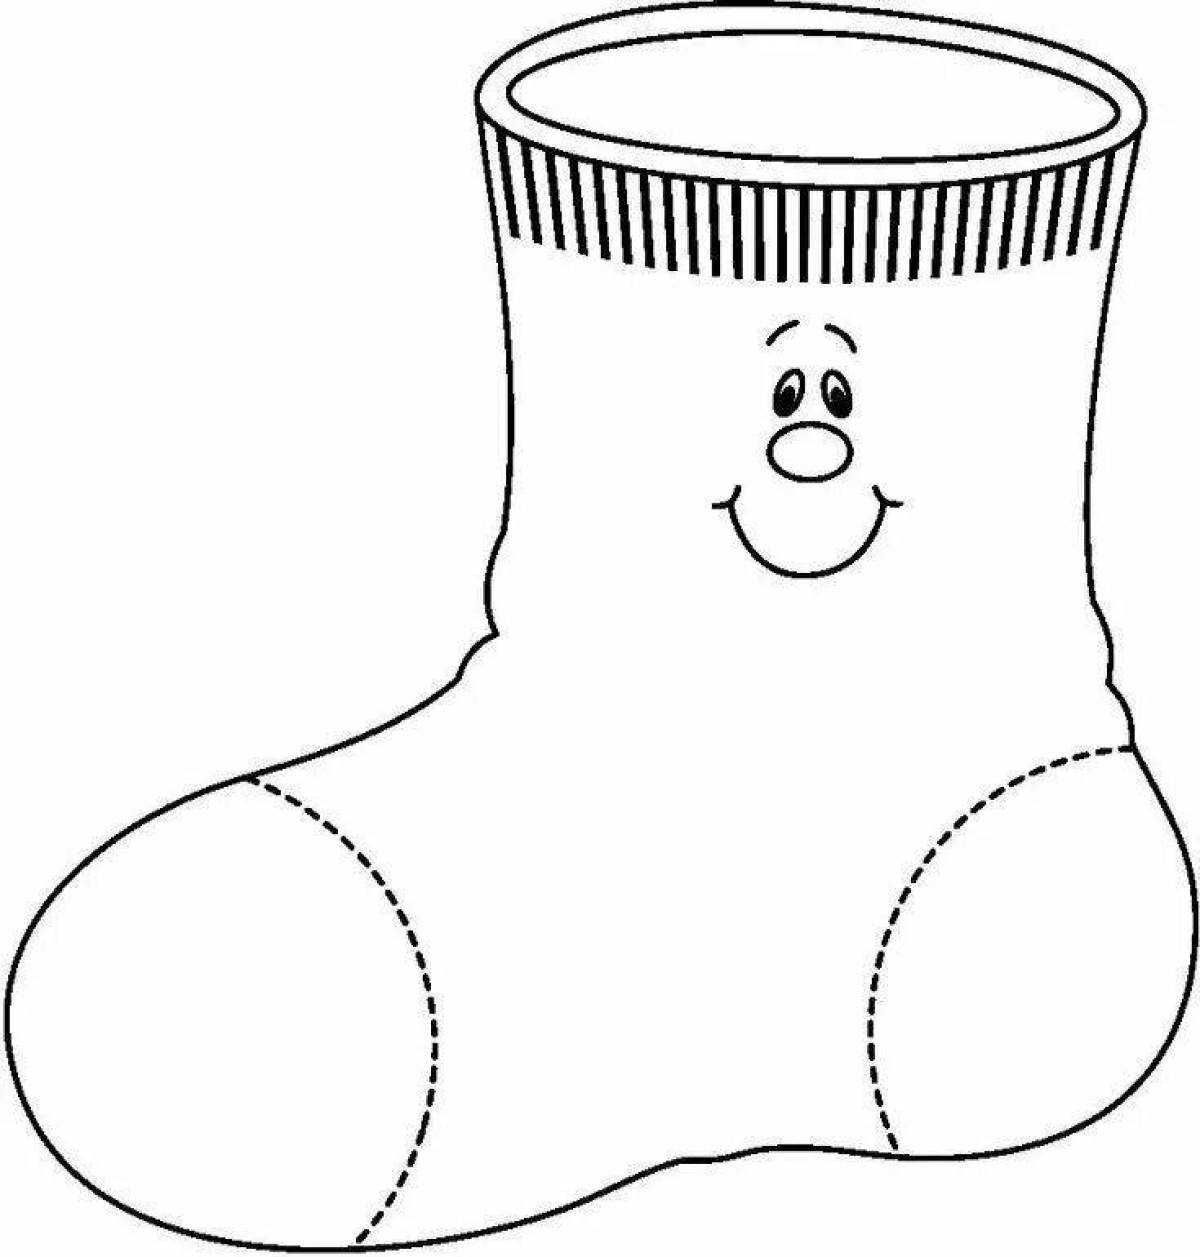 Amazing felt boots coloring page